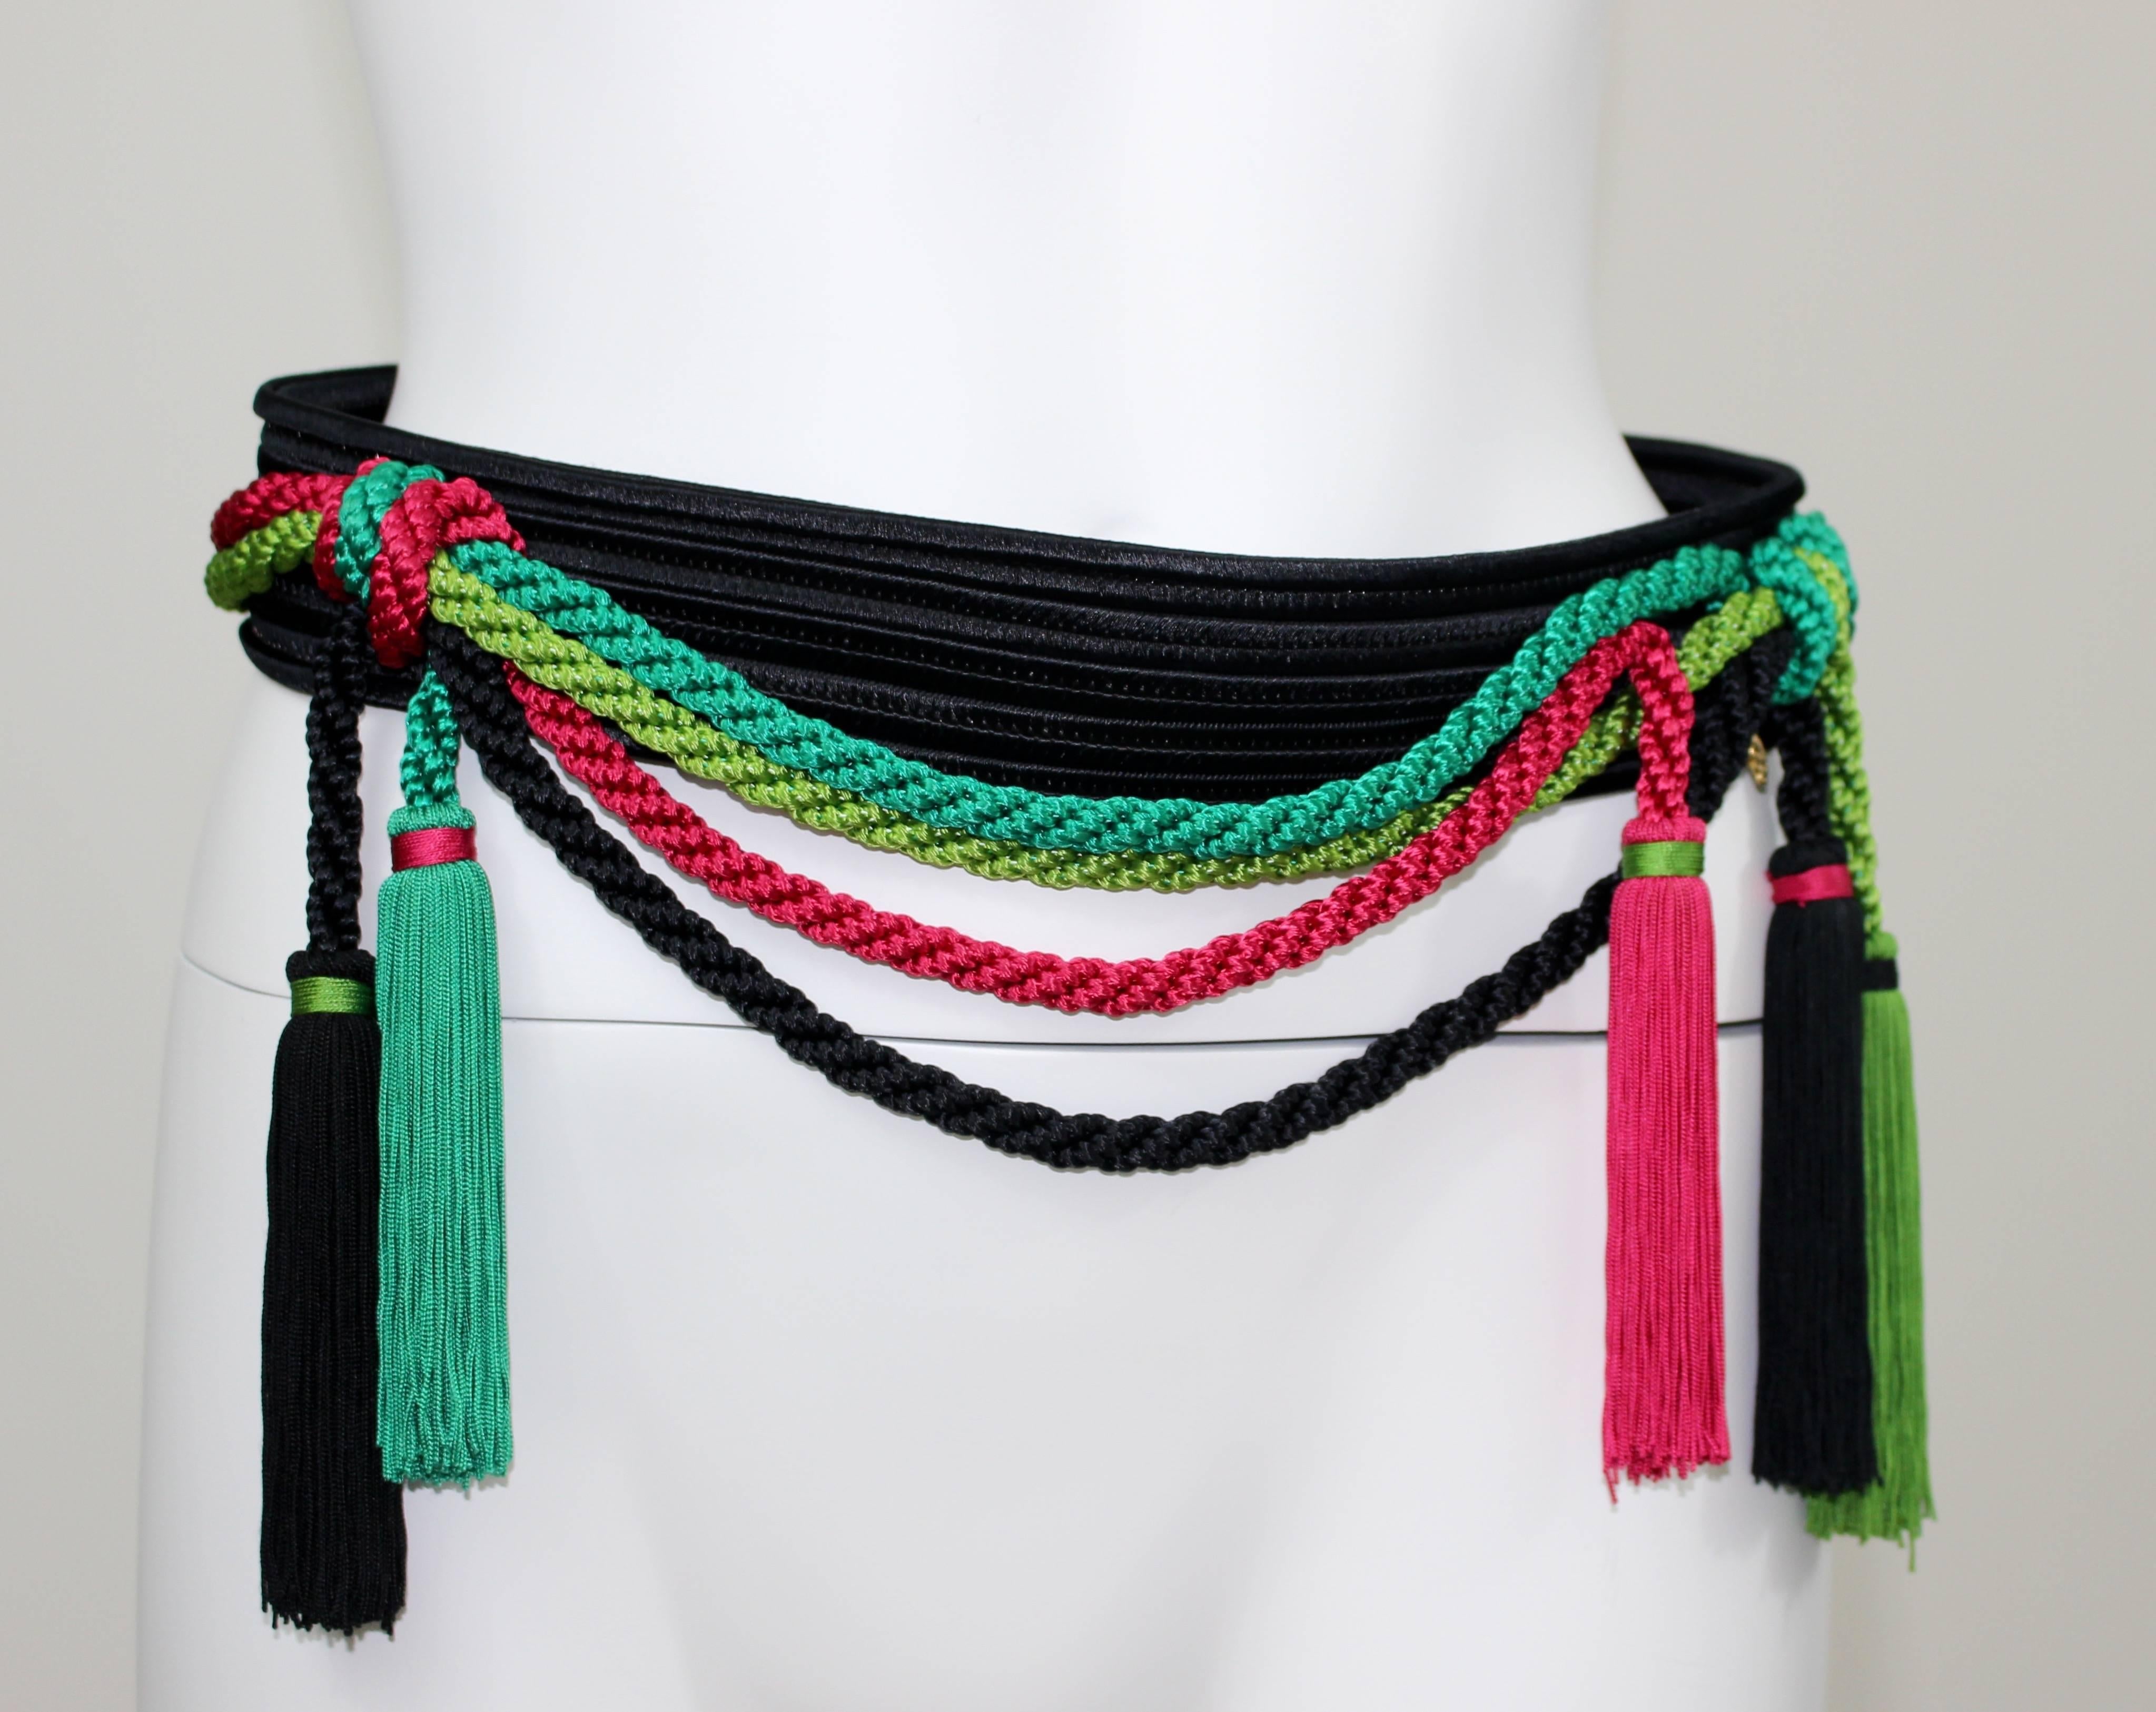 Vintage Yves Saint Laurent Russian rope and tassel belt.
Black with ropes in turquoise, chartreuse, and hot pink. 
Five tassels!
Single hook closure in the back.
Signed YSL on the gold name plate that is sewn to the